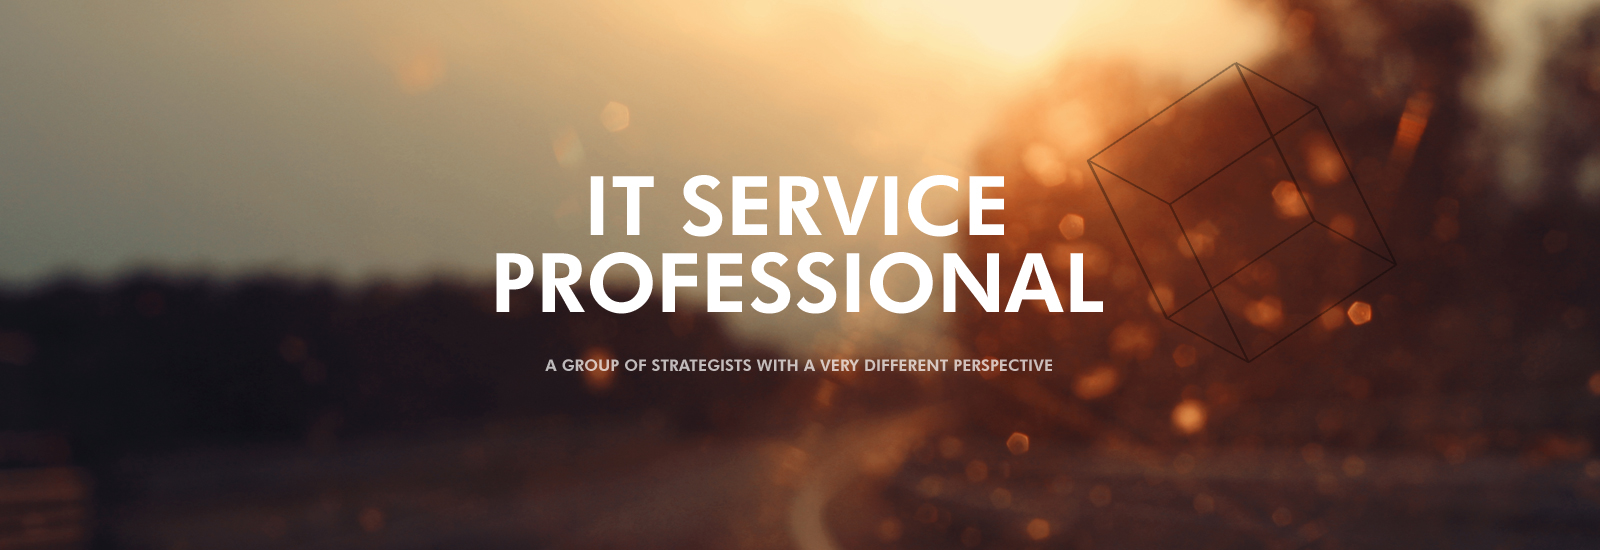 IT service professional a group of strategists with a very different perspective